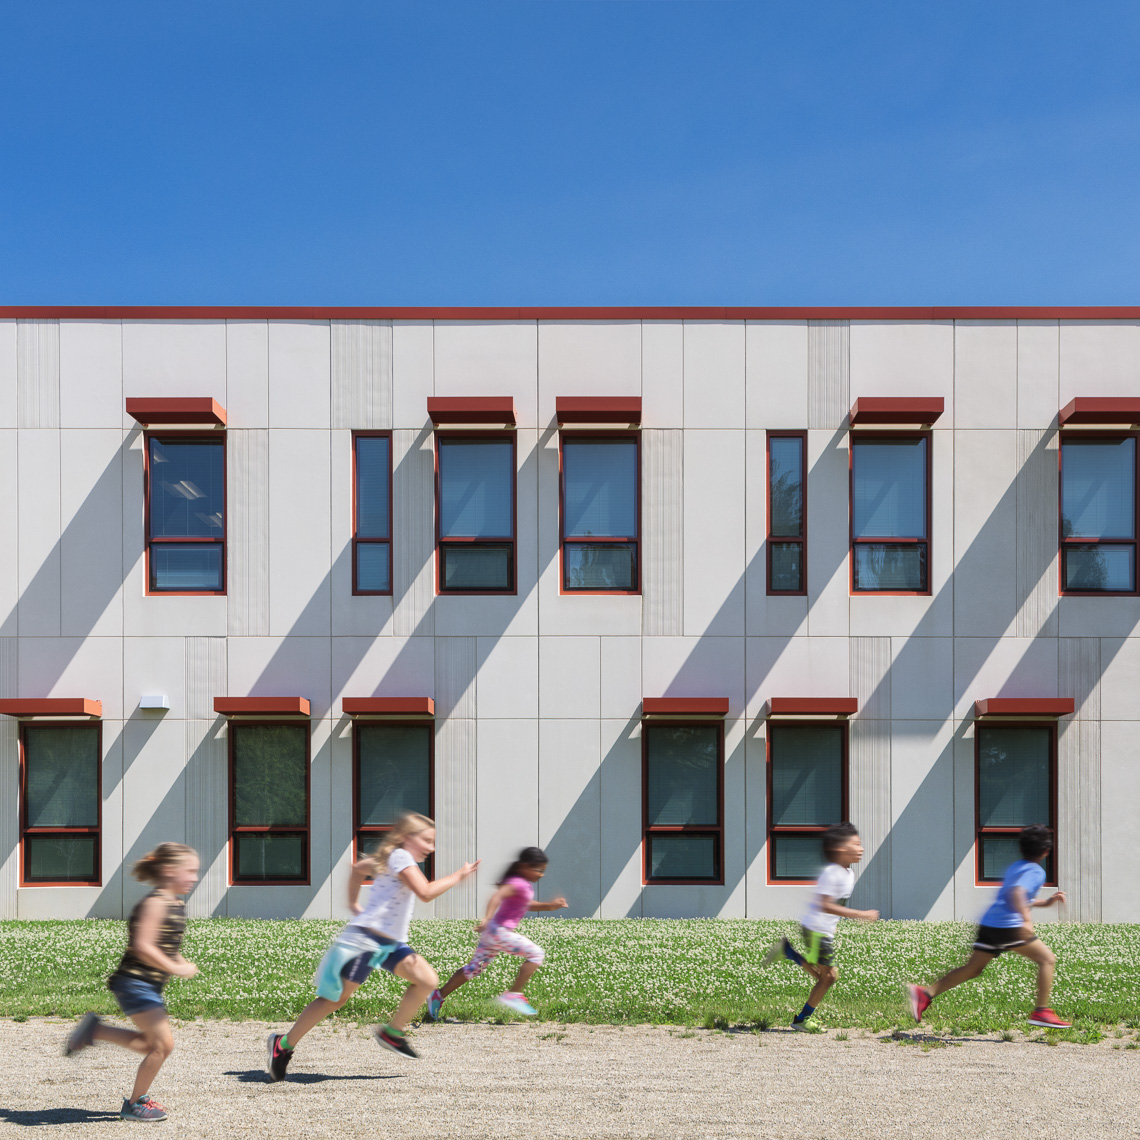 Columbus Spanish Immersion Academy by Design Group photographed by Brad Feinknopf based in Columbus, Ohio